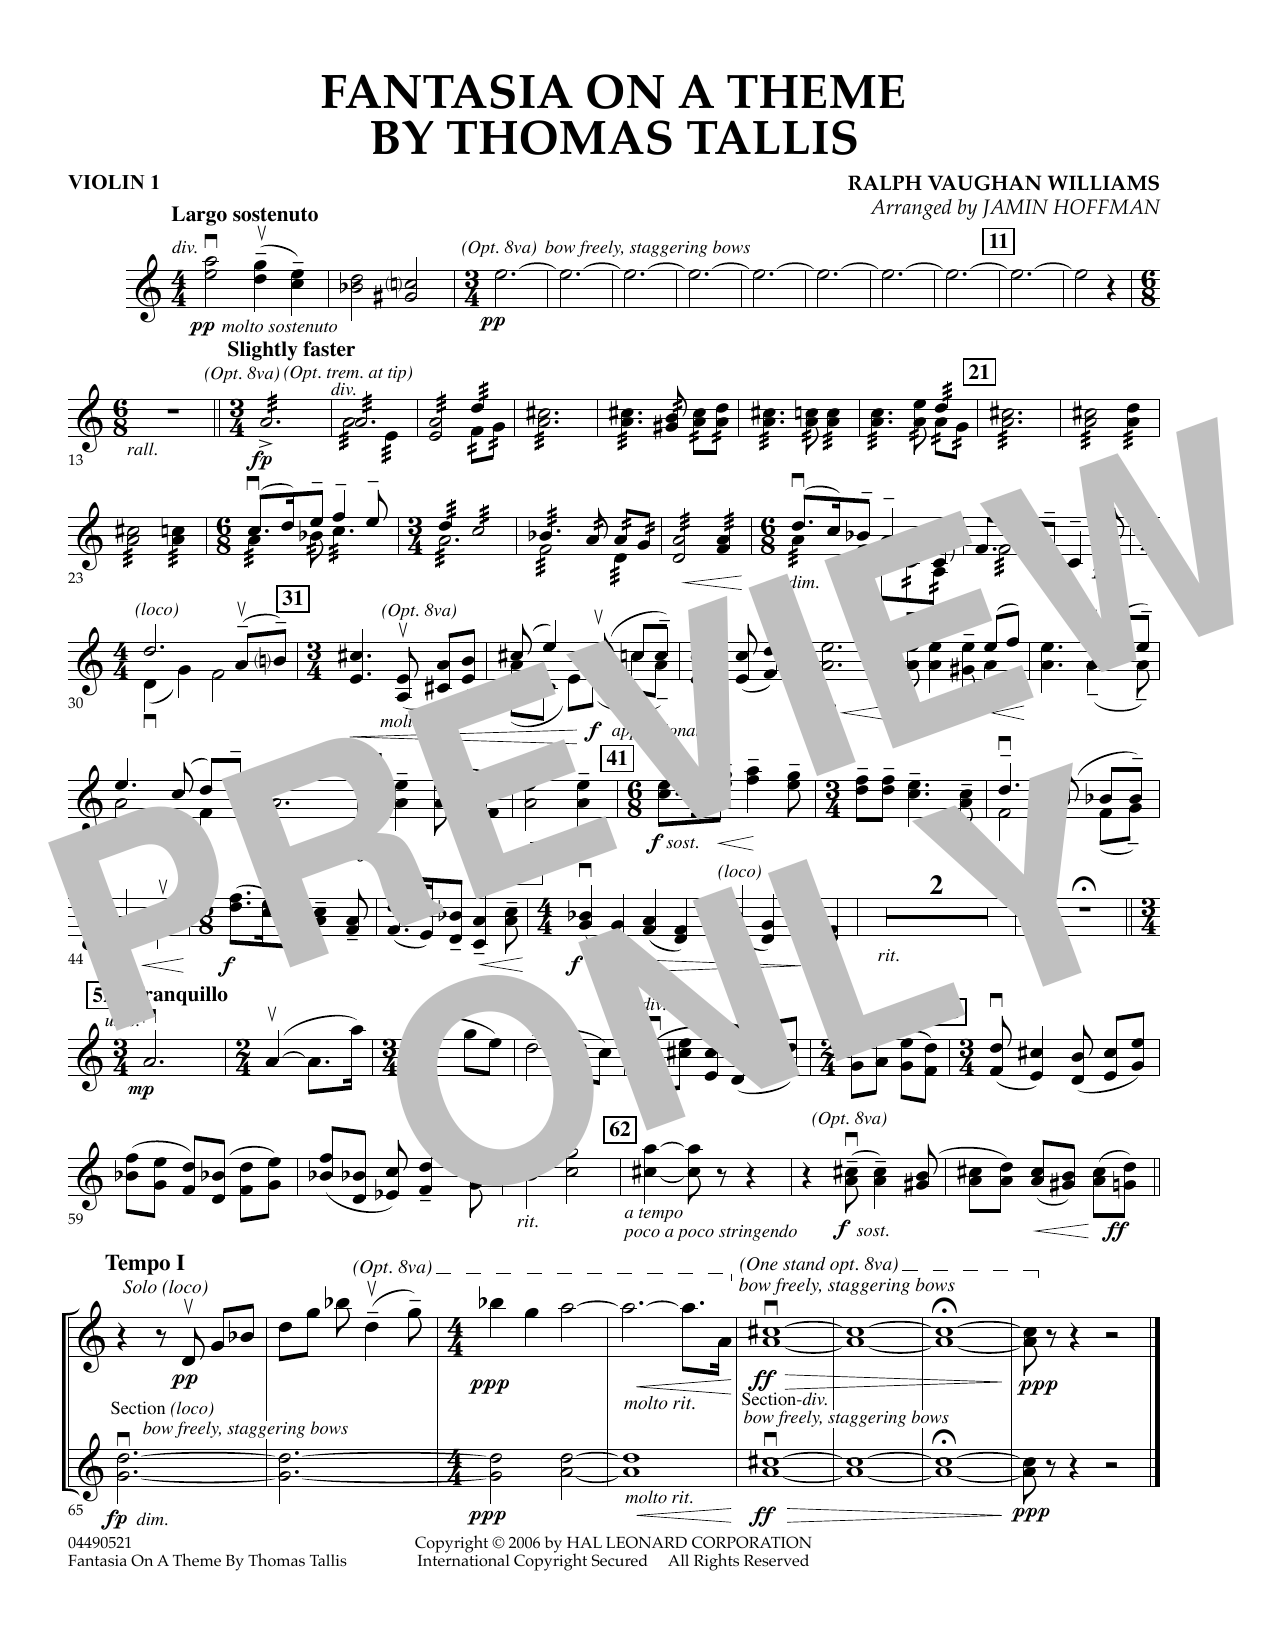 Jamin Hoffman Fantasia on a Theme by Thomas Tallis - Violin 1 sheet music preview music notes and score for Orchestra including 1 page(s)